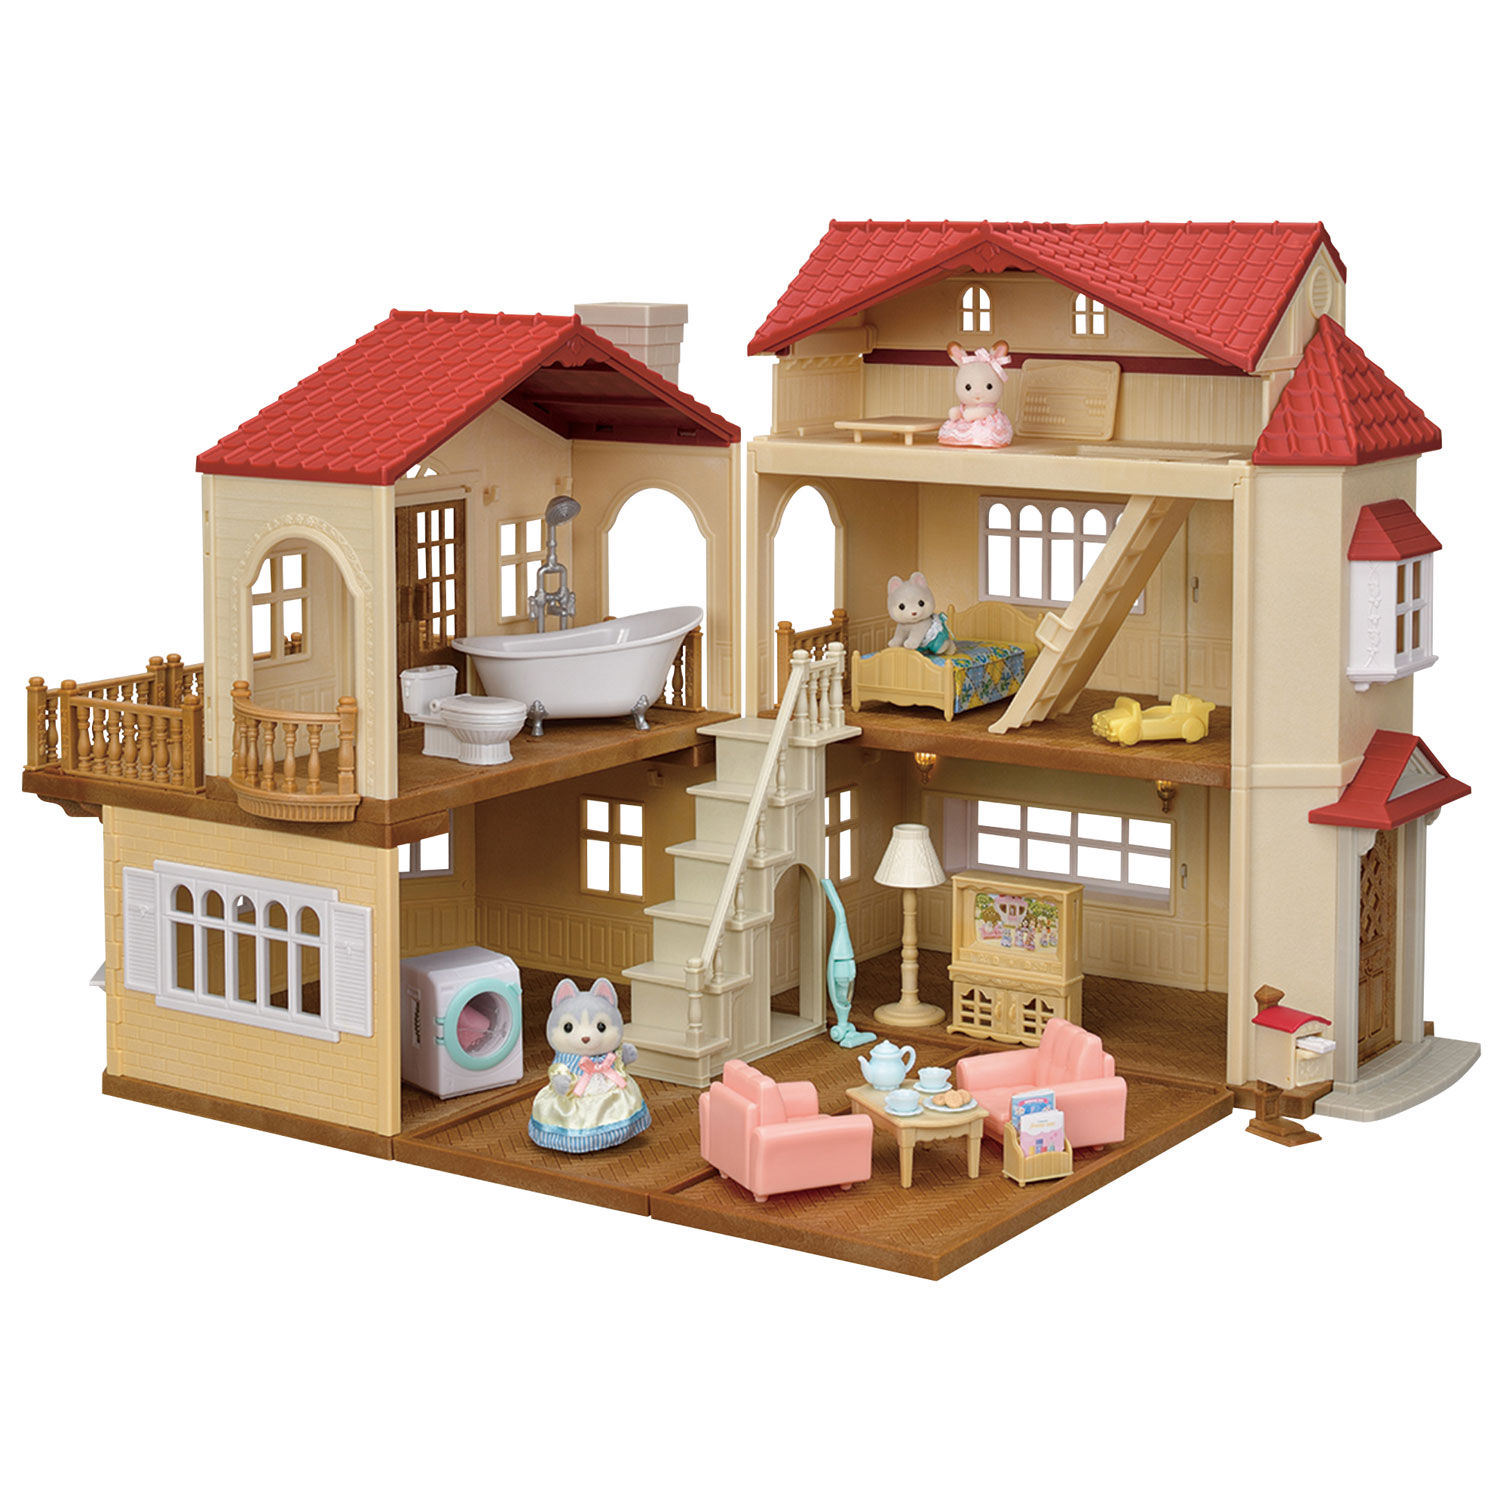 Calico Critters Red Roof Country Home: Secret Attic Playroom Playset